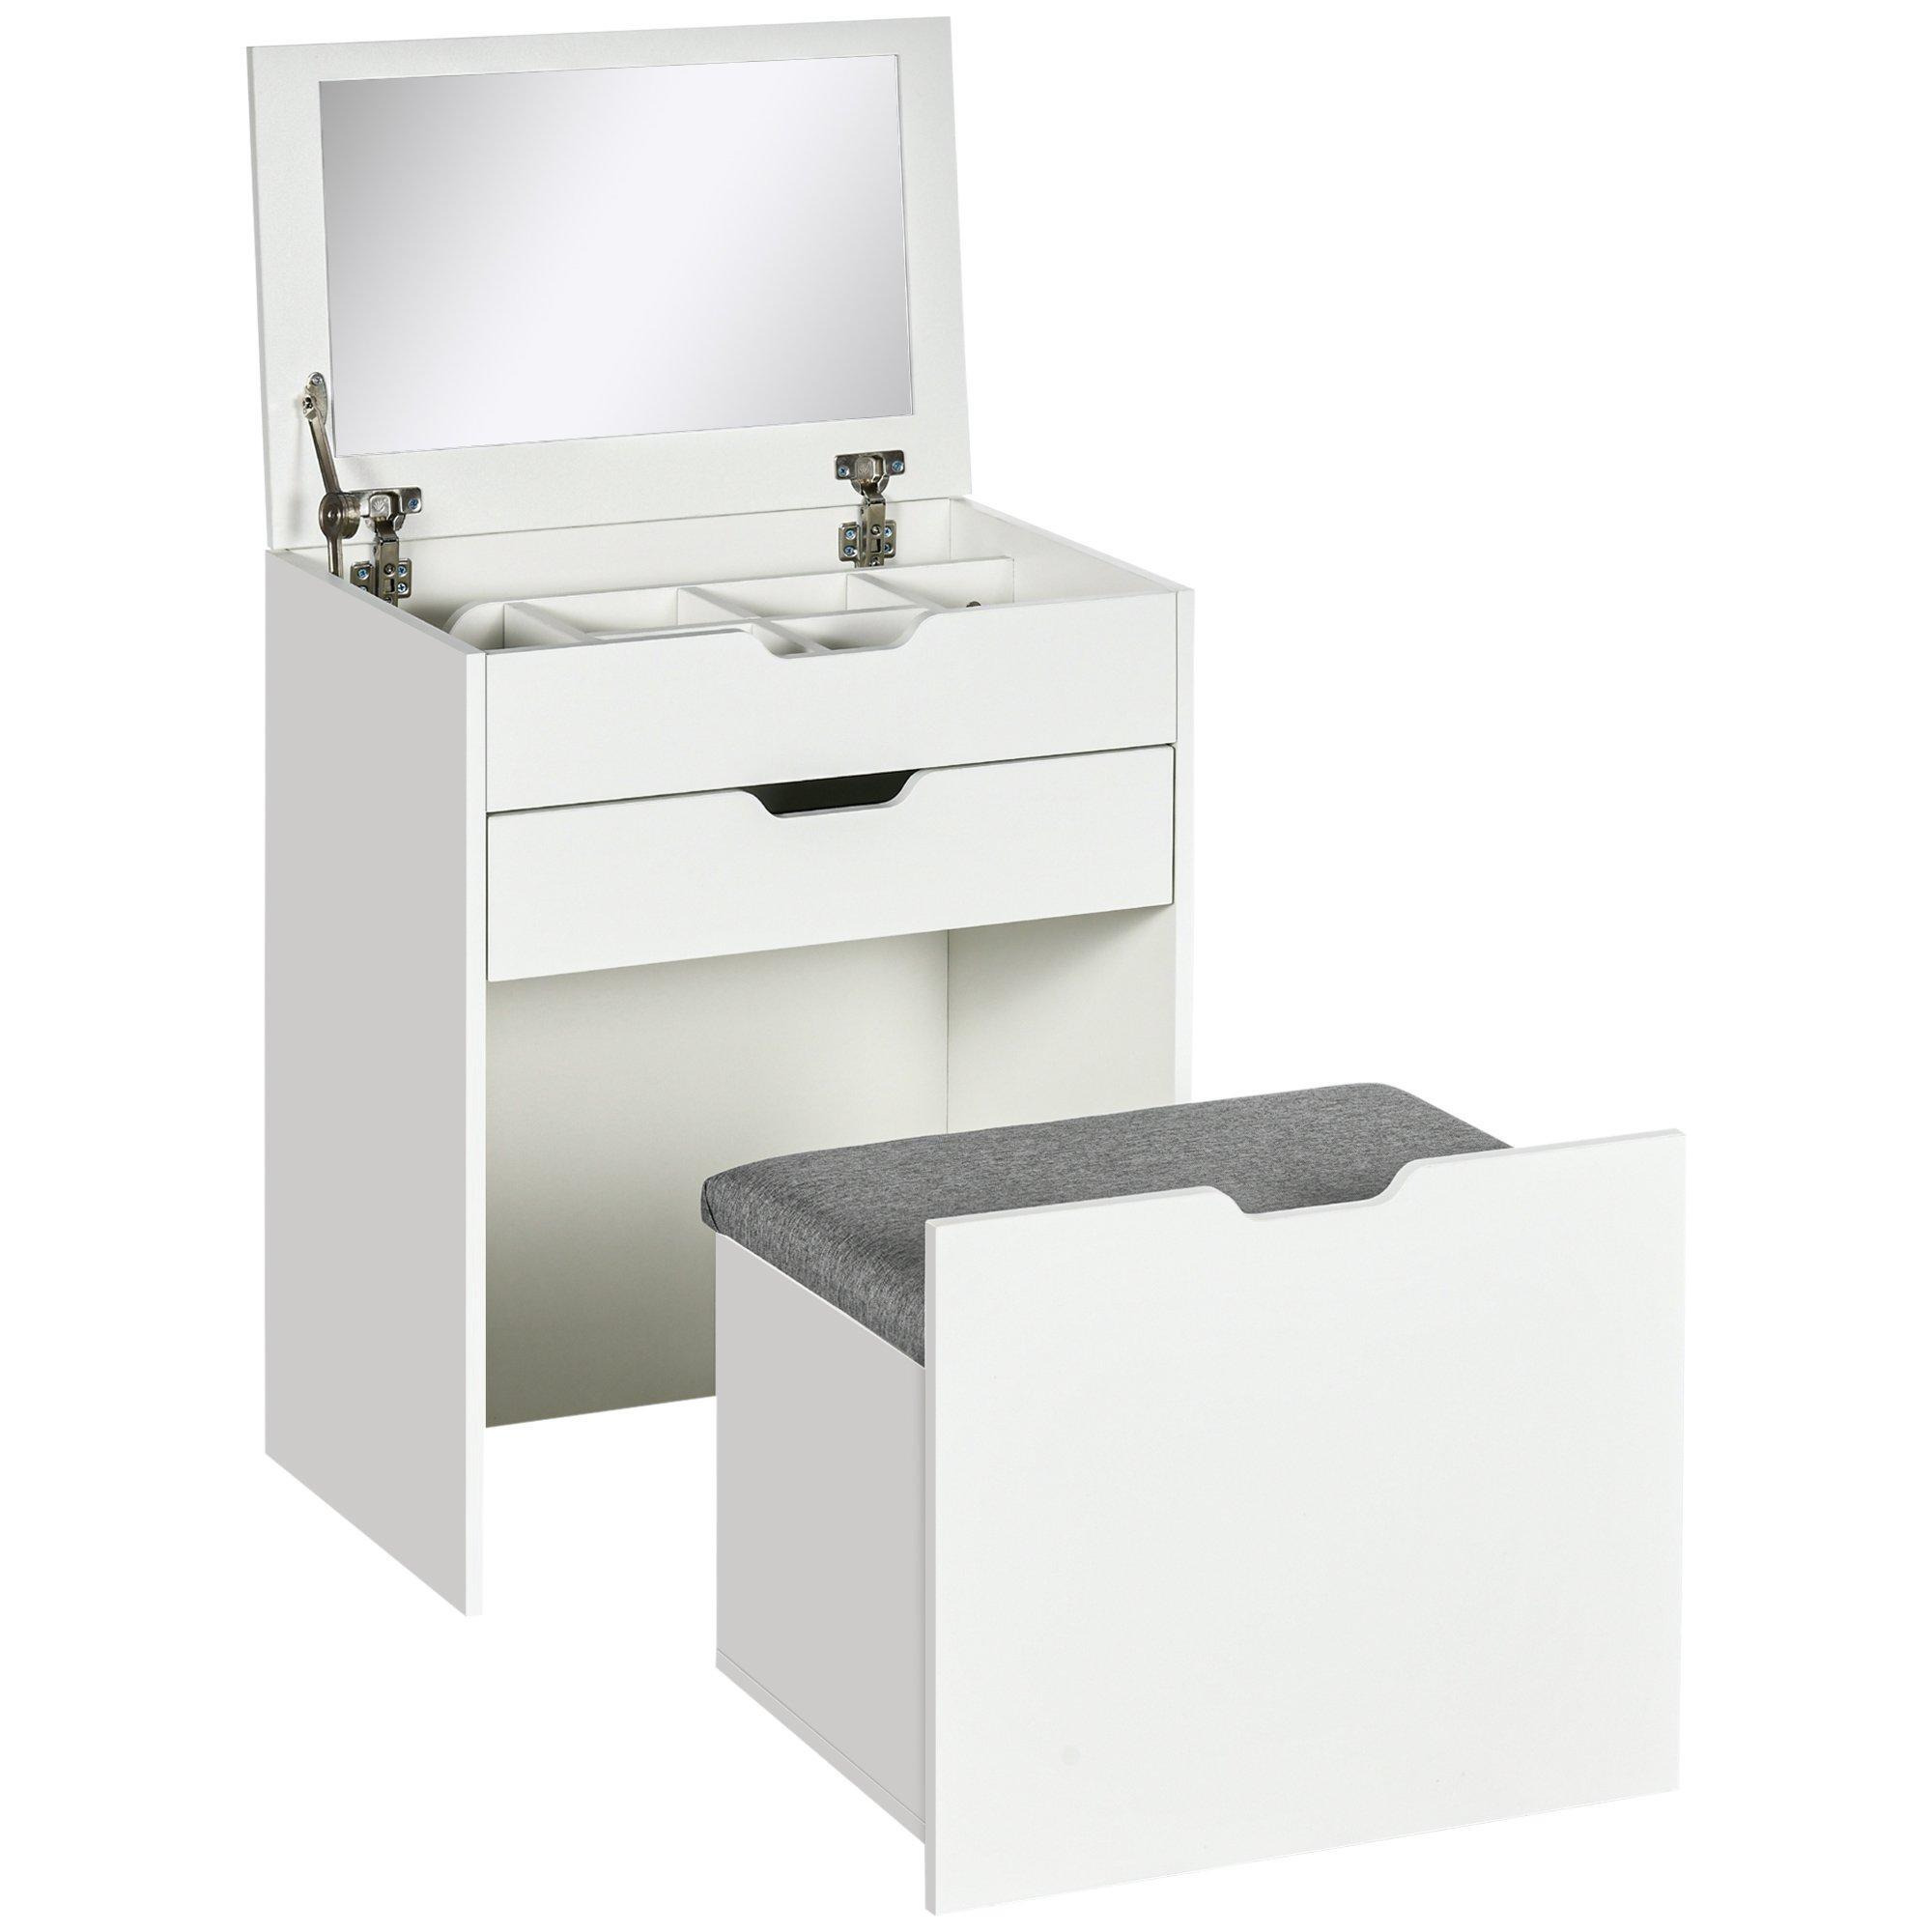 Dressing Table Set Flip up Mirror Stool Drawer and Compartments - image 1